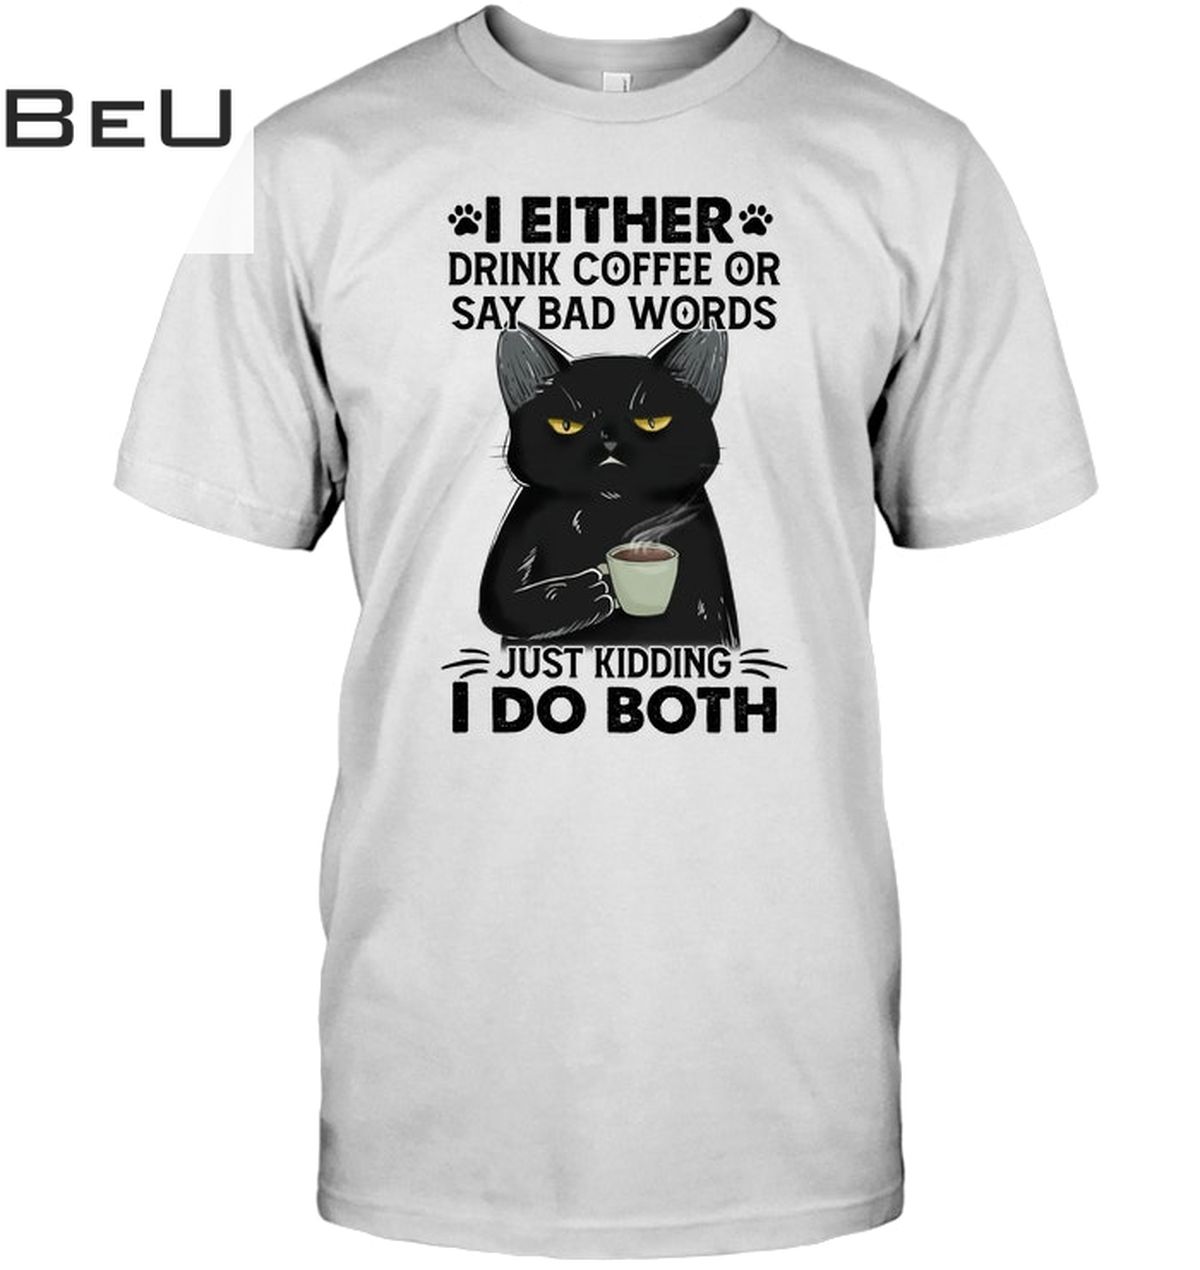 Black Cat I Either Drink Coffee Or Say Bad Words Just Kidding I Do Both Shirt